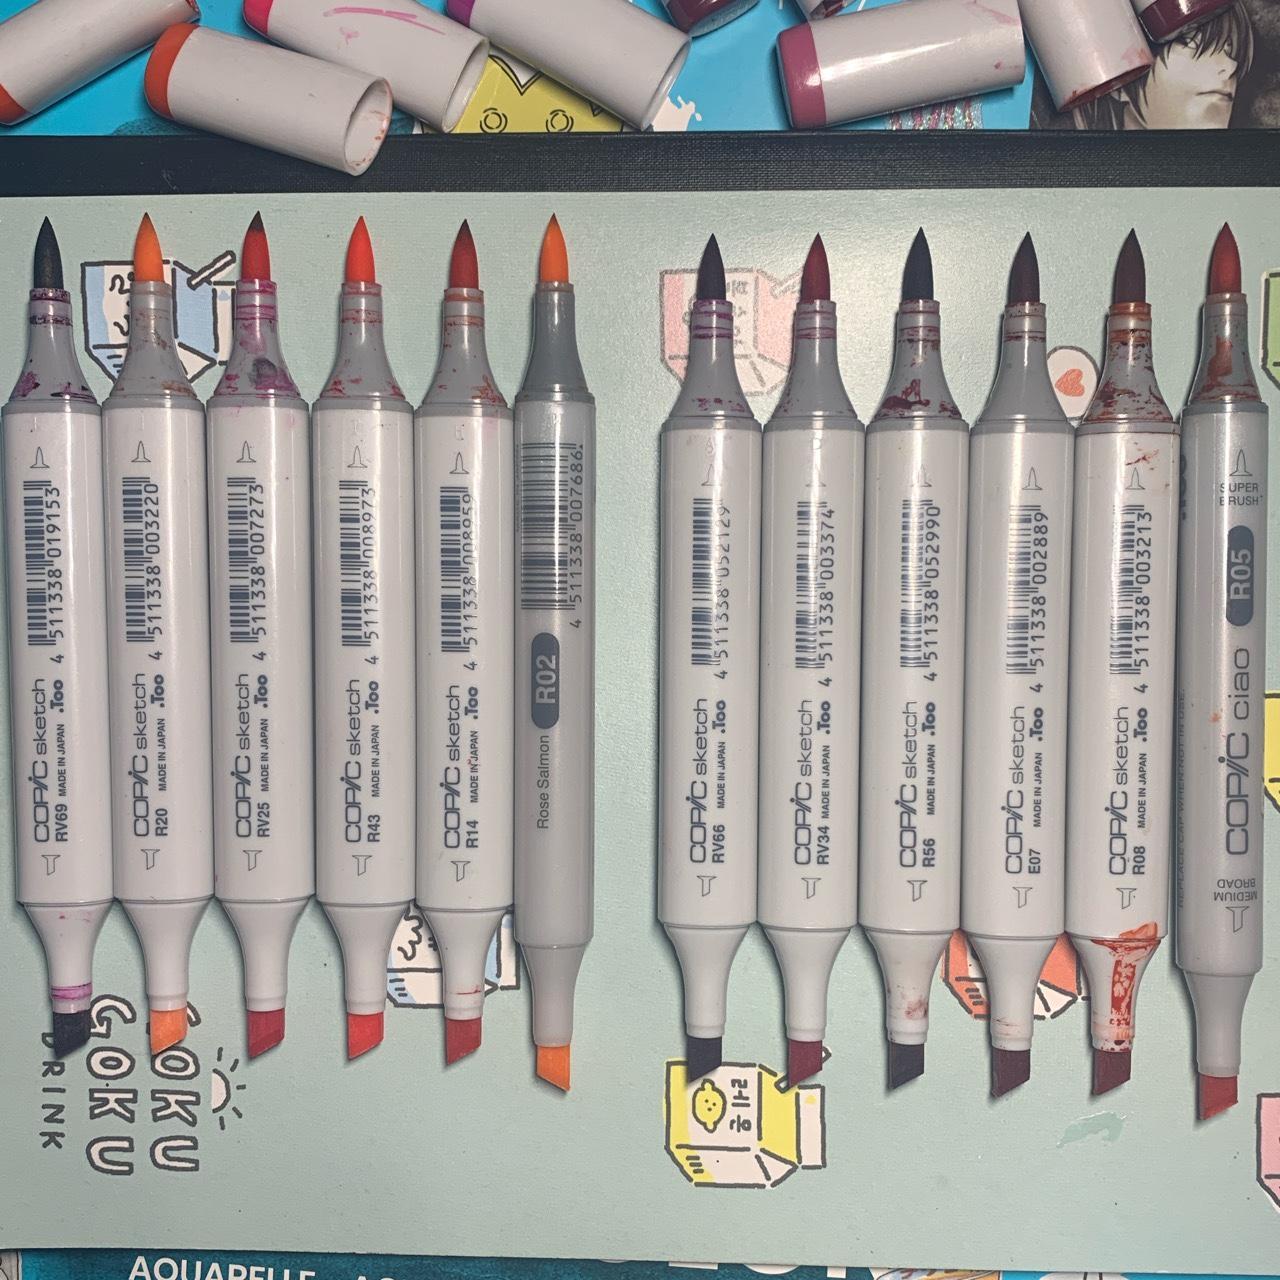 Copic Ciao Set of 72 markers Very good quality - - Depop